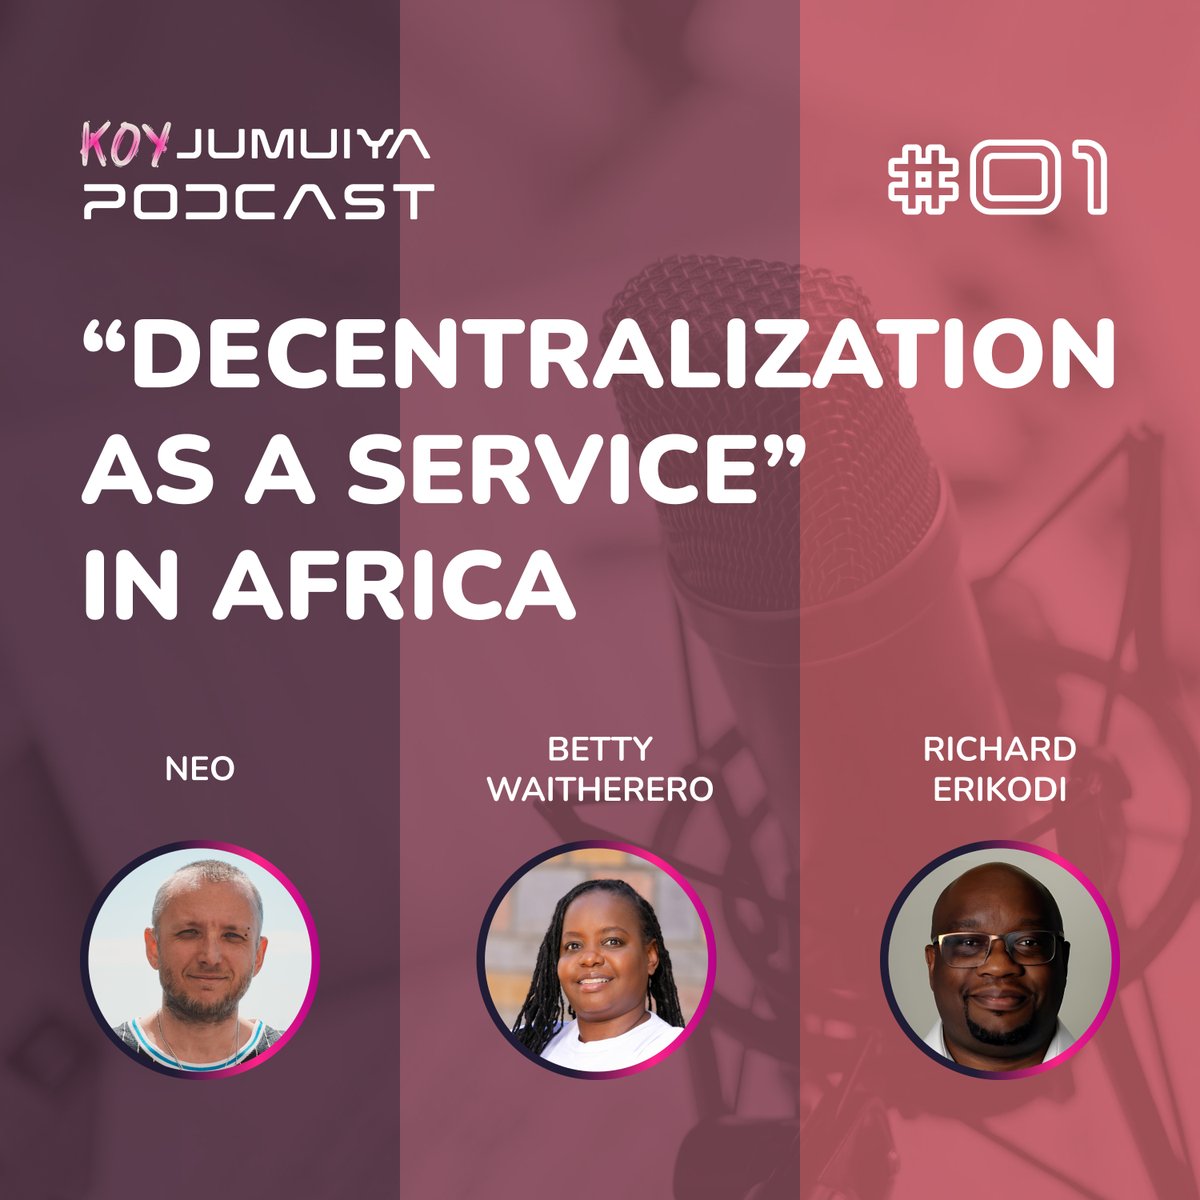 How KOY 2.0 Can Revolutionize Businesses with Decentralization-as-a-Service

Ready to be at the forefront? Get ready to explore how KOY 2.0's DaaS platform can reshape the way businesses operate in Africa and beyond.

A thread🧵

#KOYv2 $KOYN